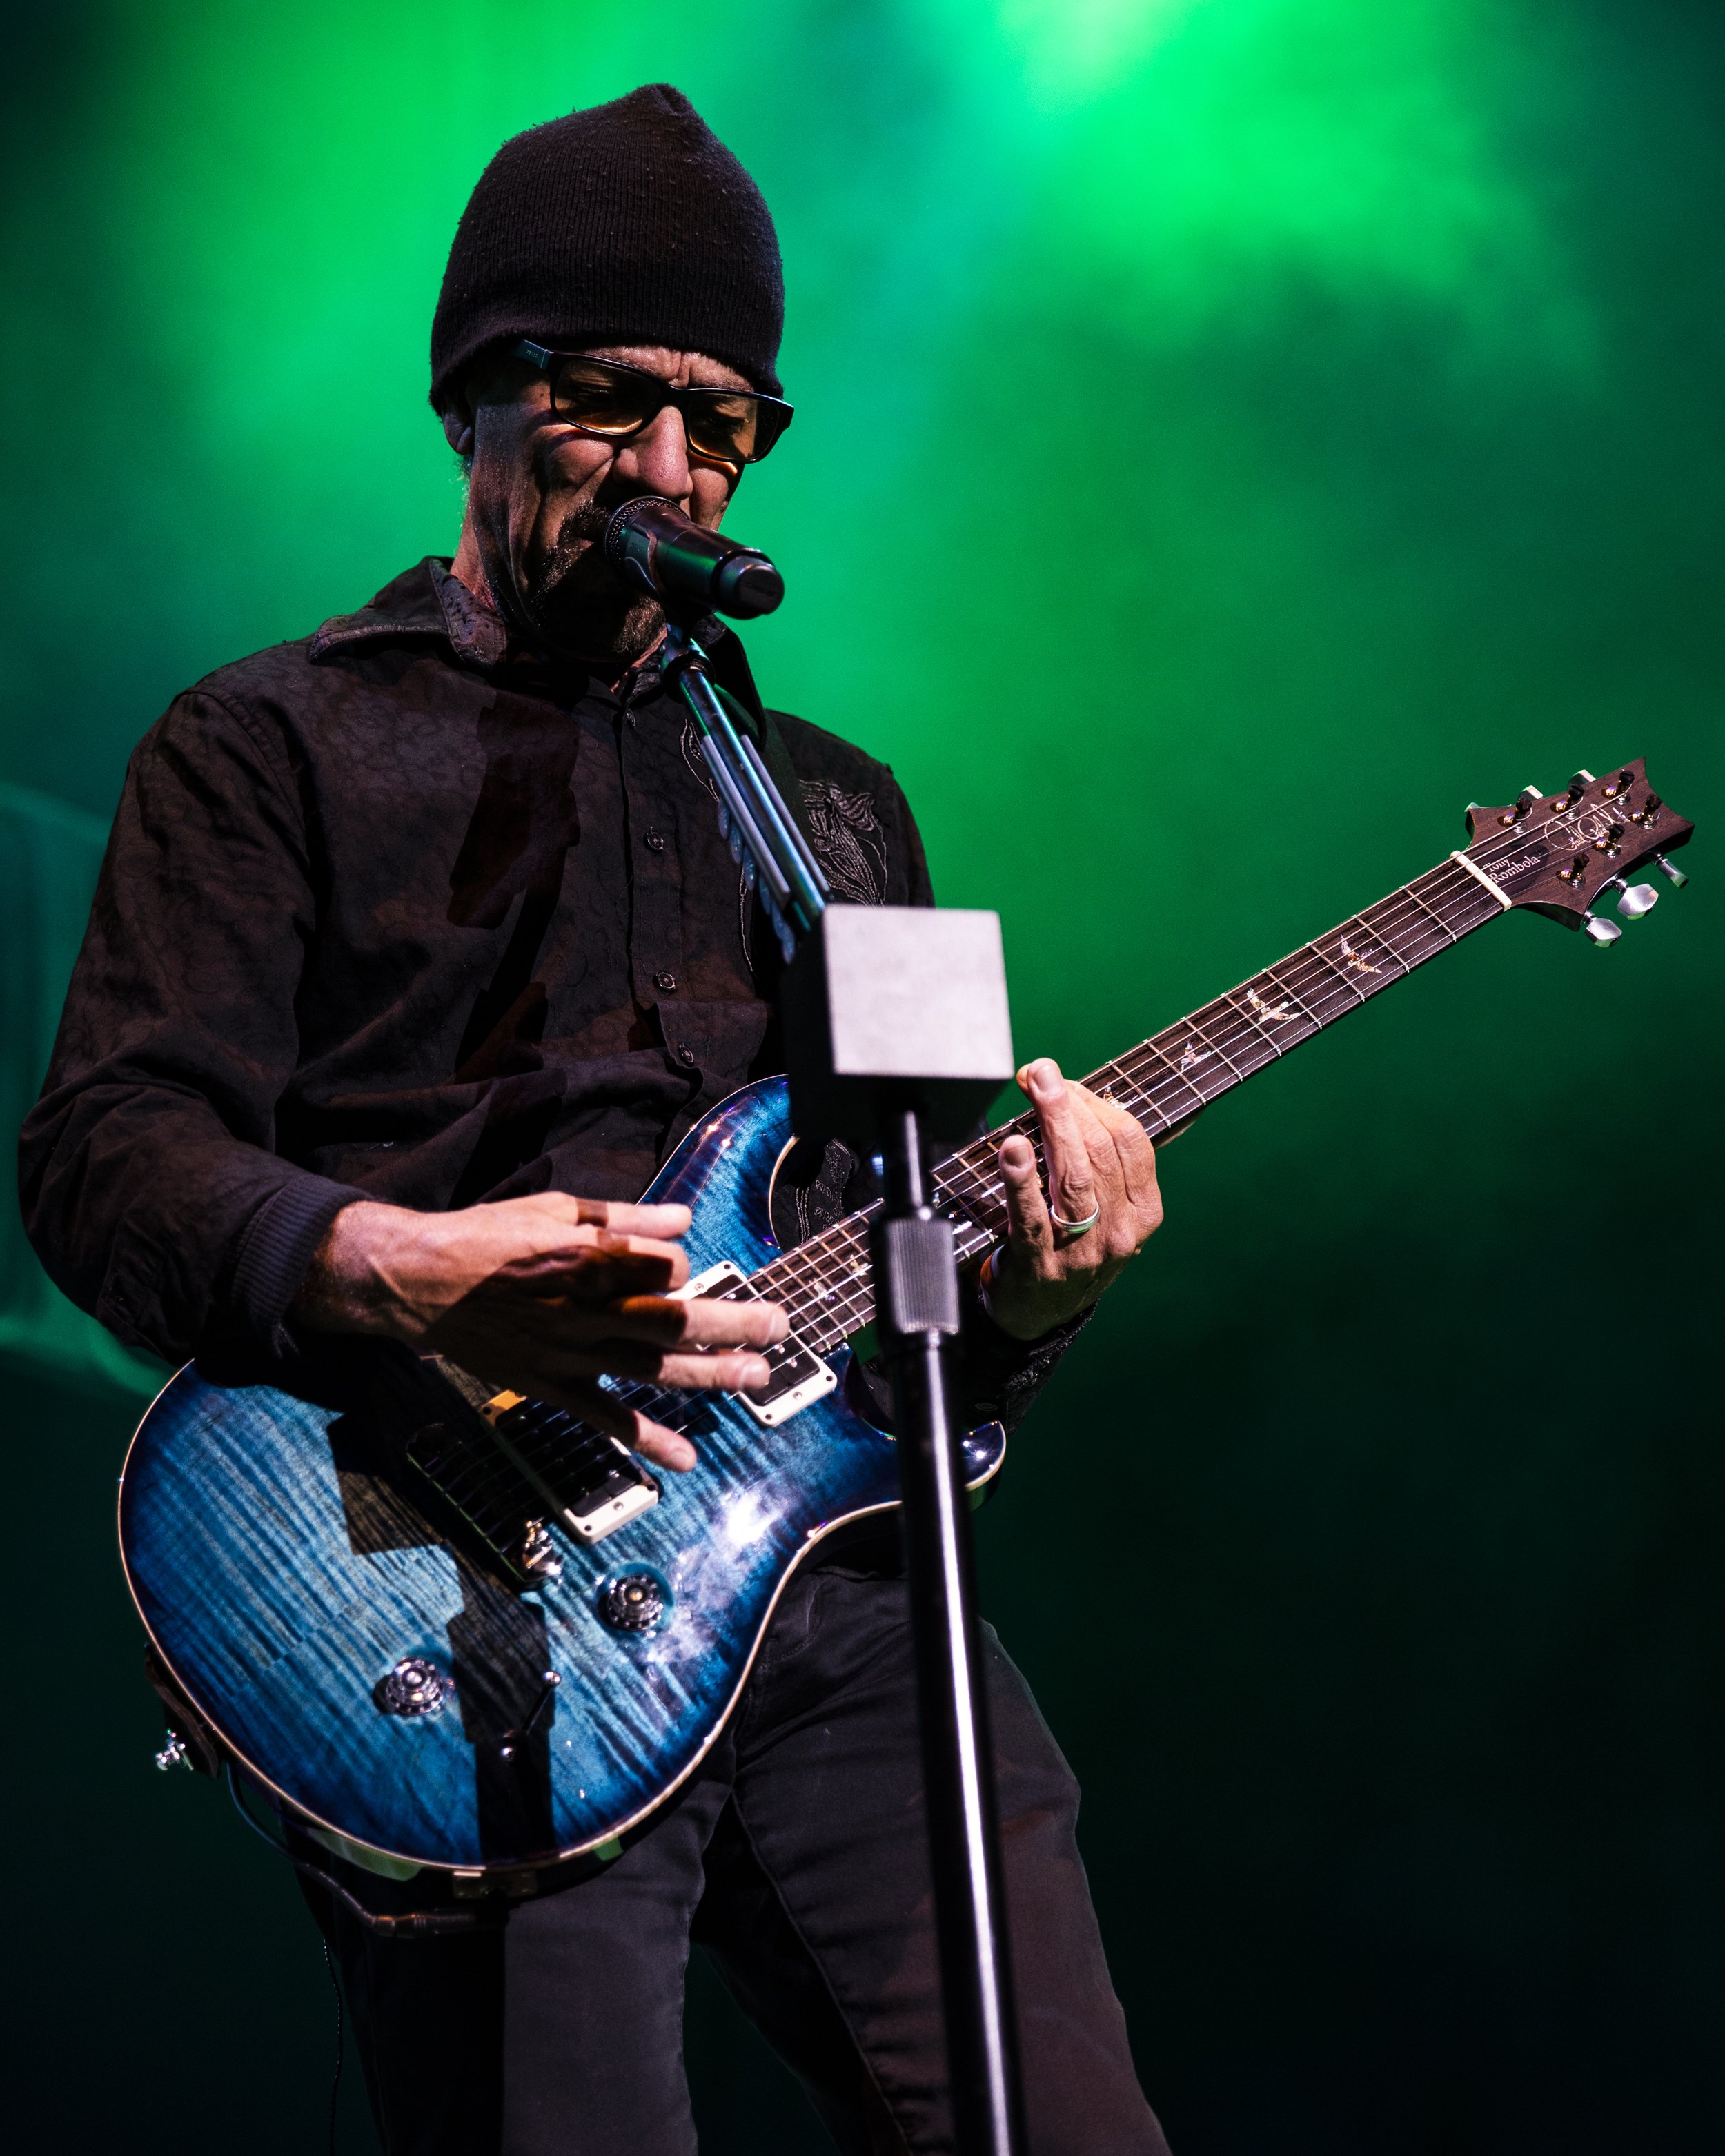 Godsmack, I Prevail, Bad Omens, Fame On Fire - 107.9 KBPI BIRTHDAY BASH - Fiddler's Green Amphitheatre - Greenwood Village, Colorado - Thursday, May 4, 2023- PHOTO BY Mowgli Miles of Interracial Friends-114.JPG